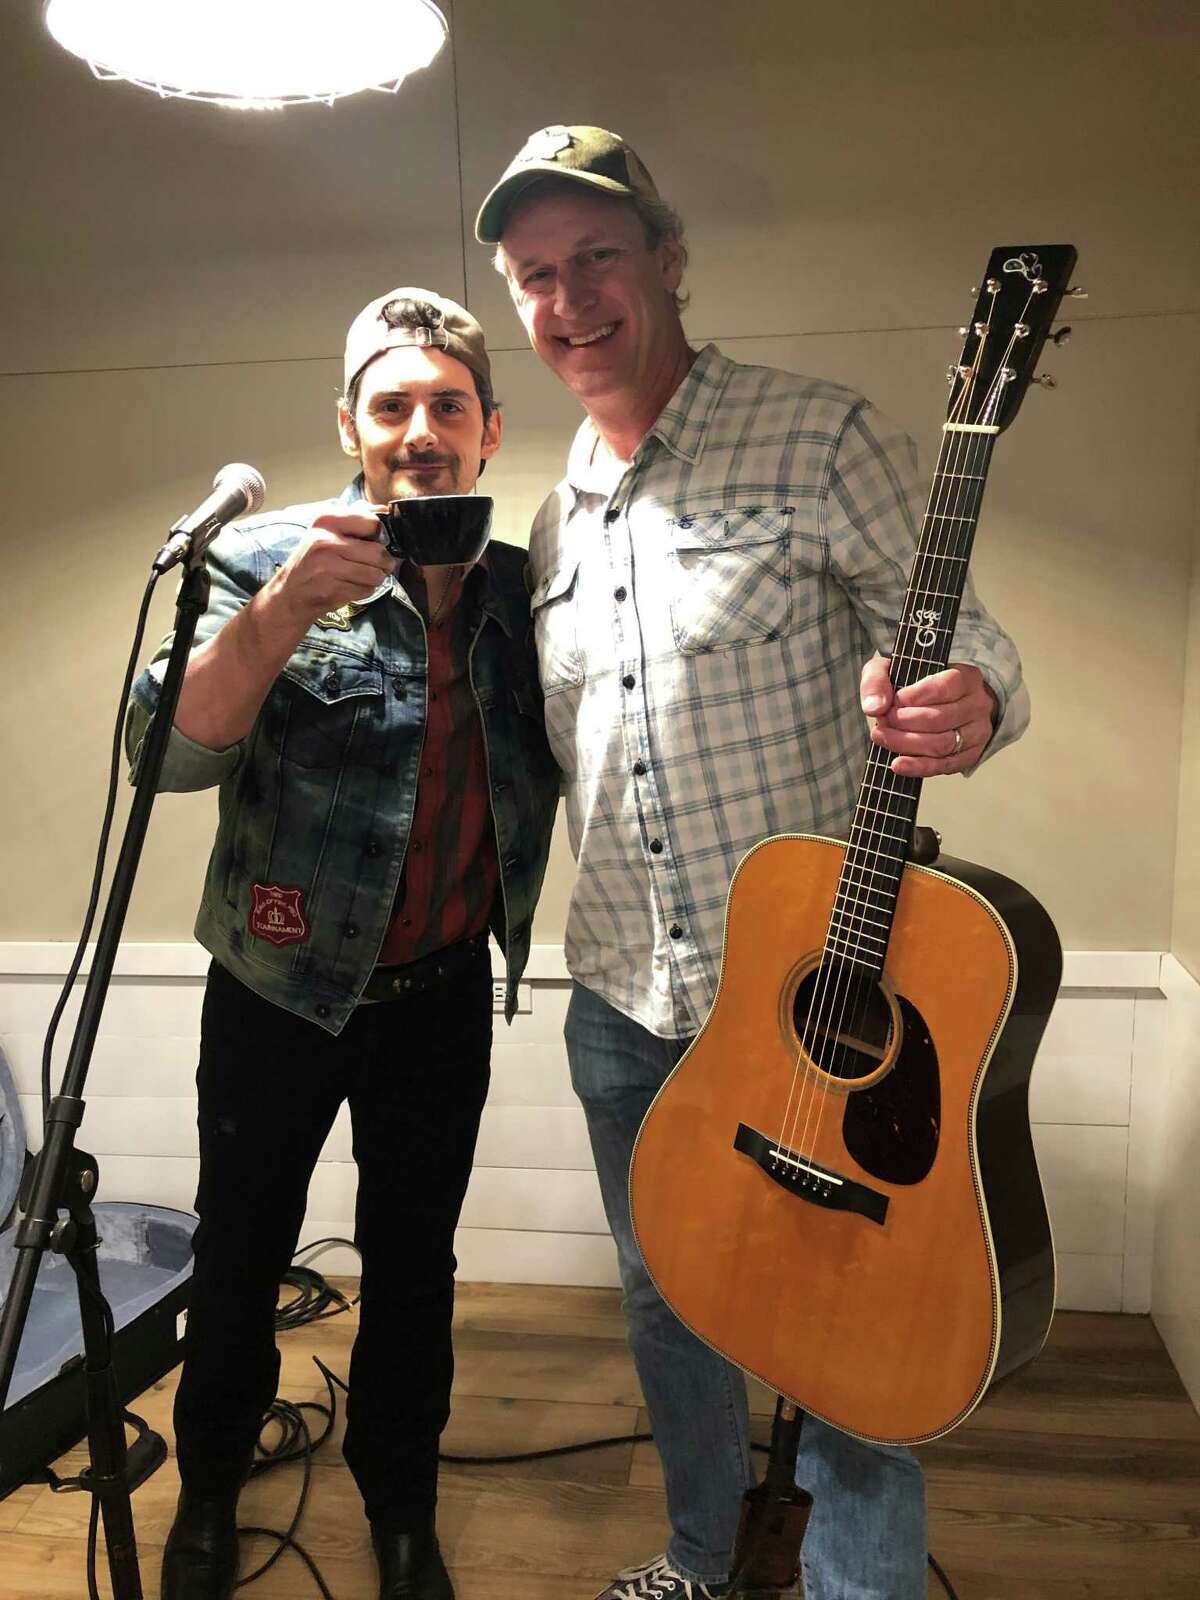 Blue Door Coffee Company owner Chad Gauntt is good friends with Brad Paisley, who popped in for a surprise gig.